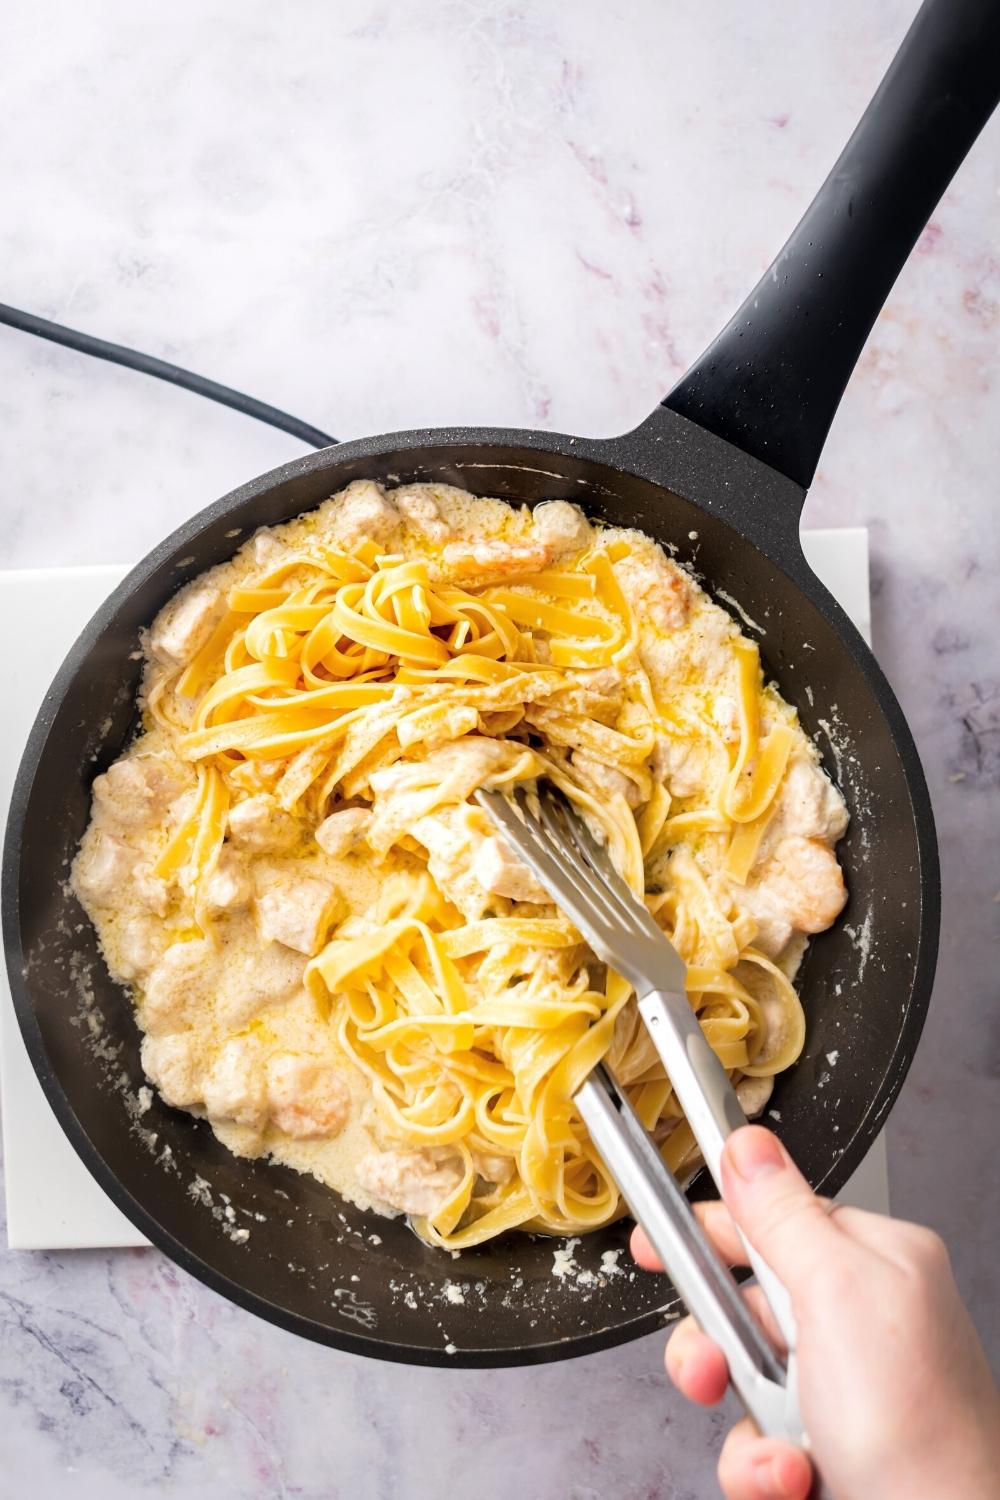 Fettuccine pasta in a skillet with chicken, shrimp, and alfredo sauce. The hand is holding a pair of tongs that is grabbing some of the pasta.